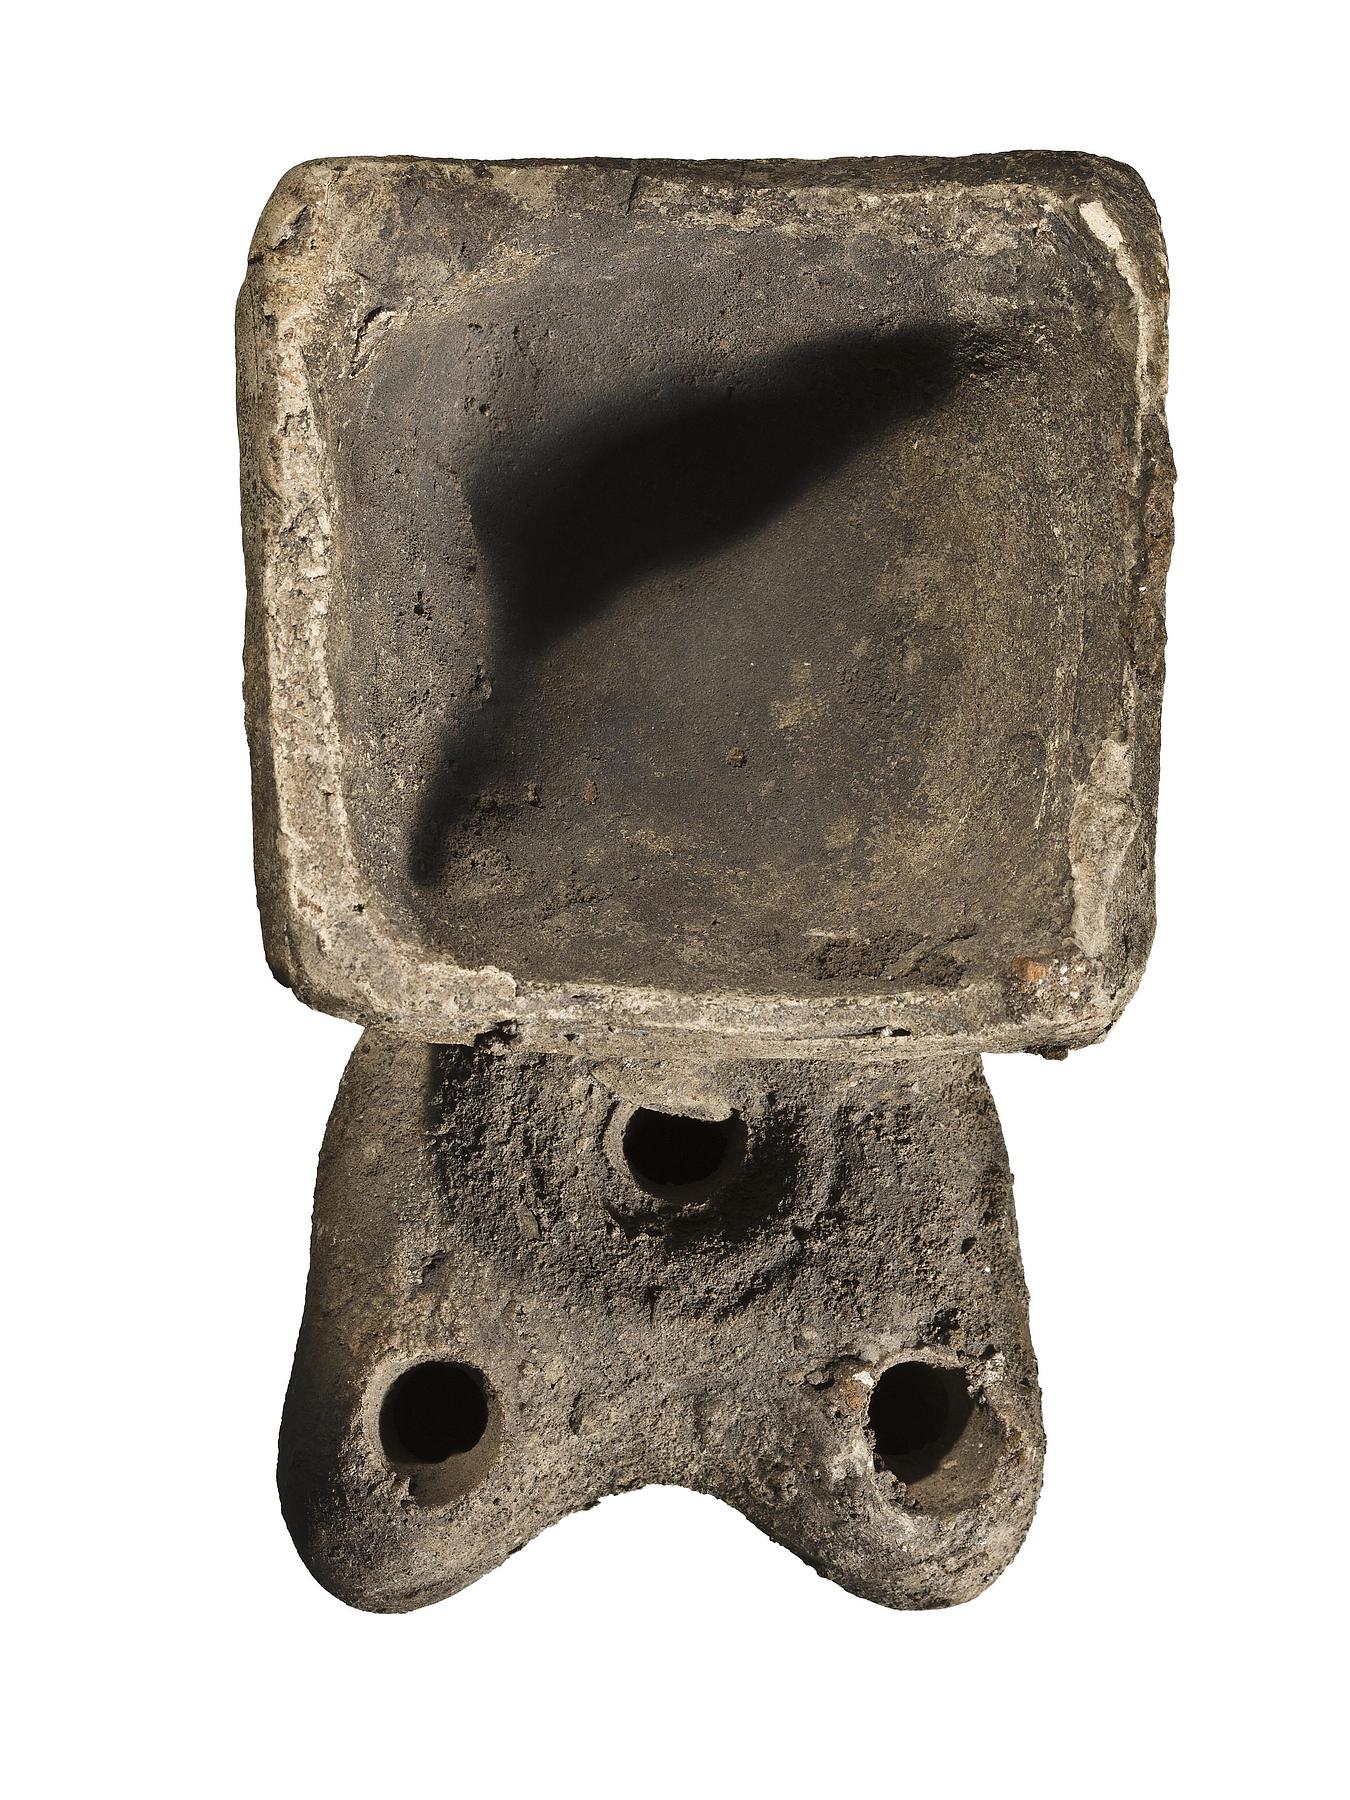 Incense burner in the shape of a miniature altar with a lamp, H1264